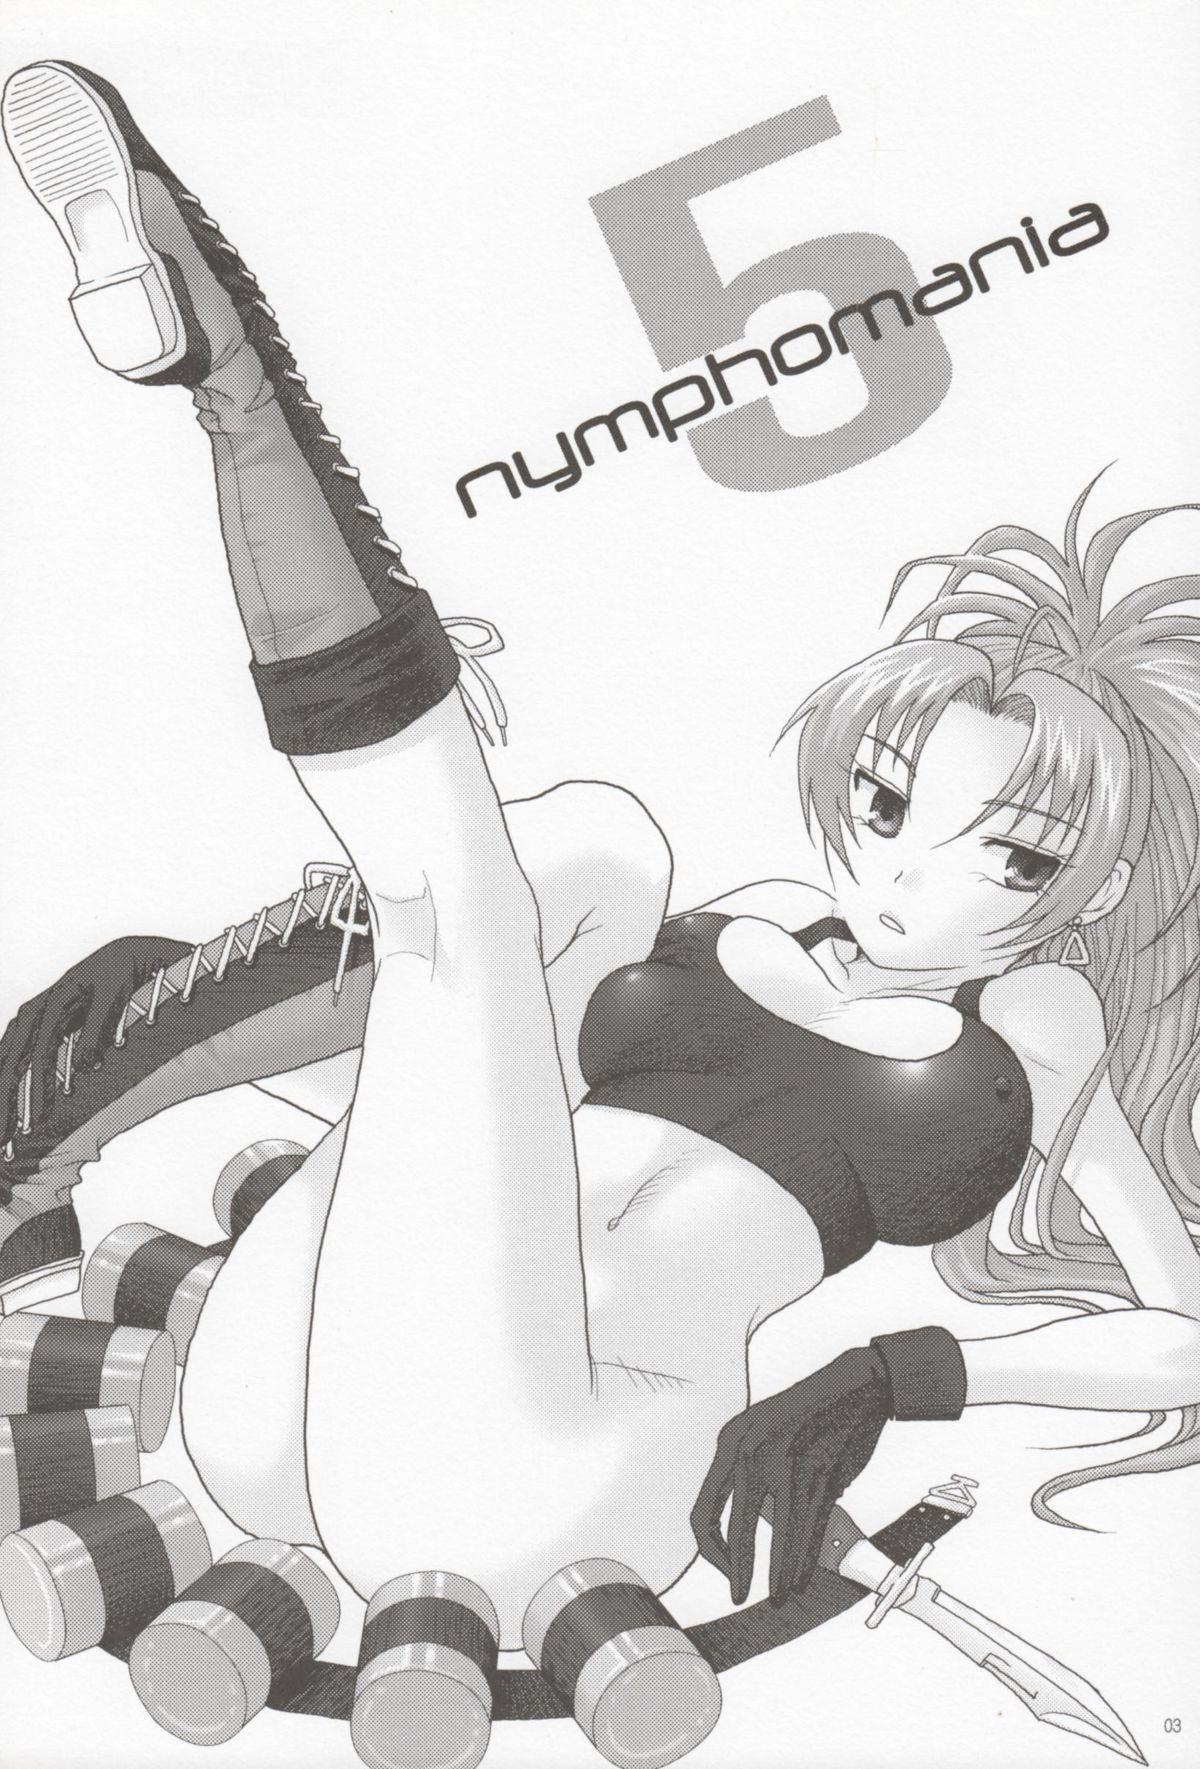 Long Hair nymphomania 5 - King of fighters Nice Ass - Page 2